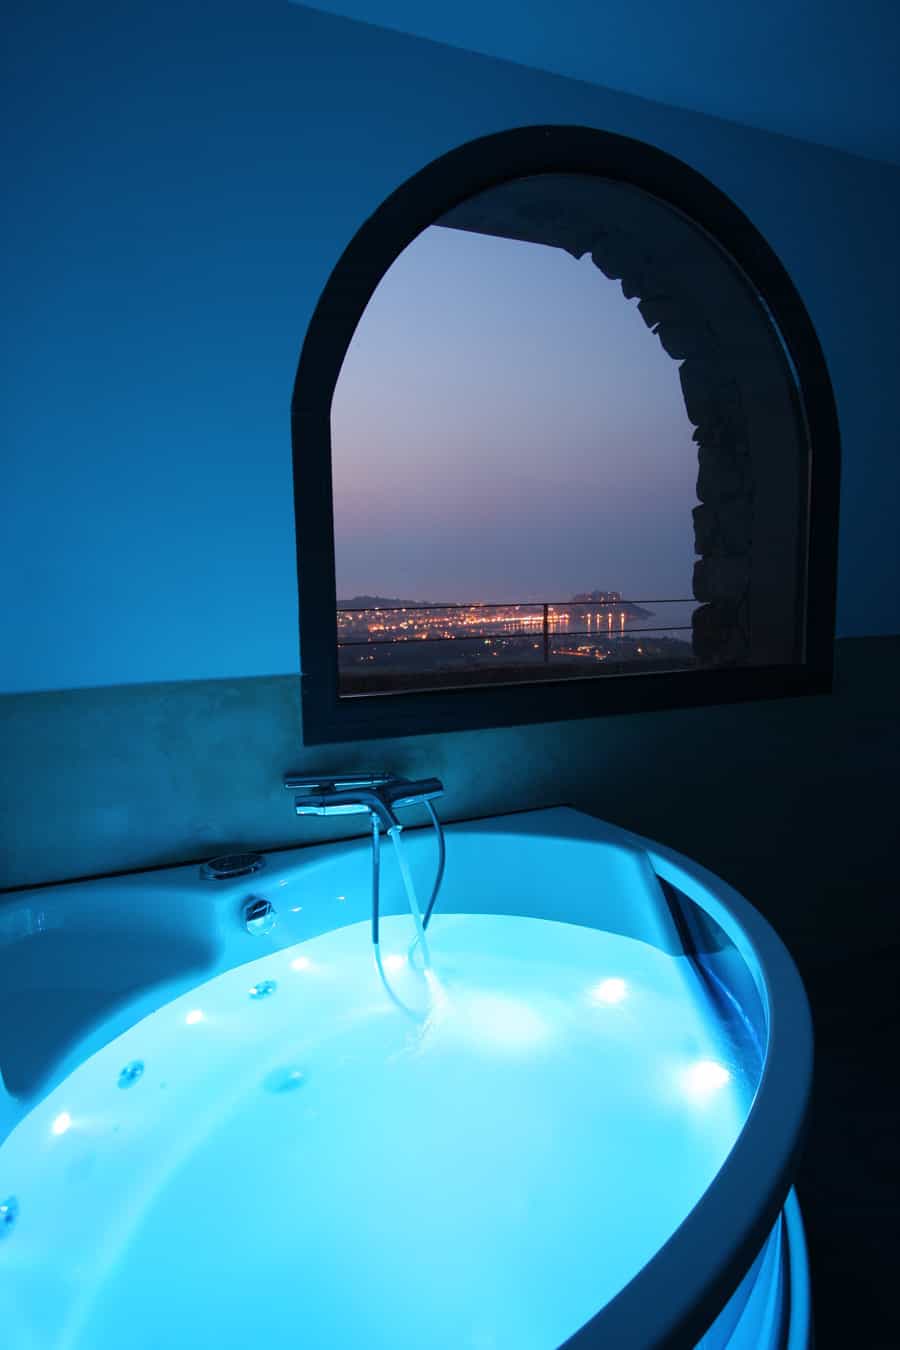 10 Bathrooms With a View You Must See